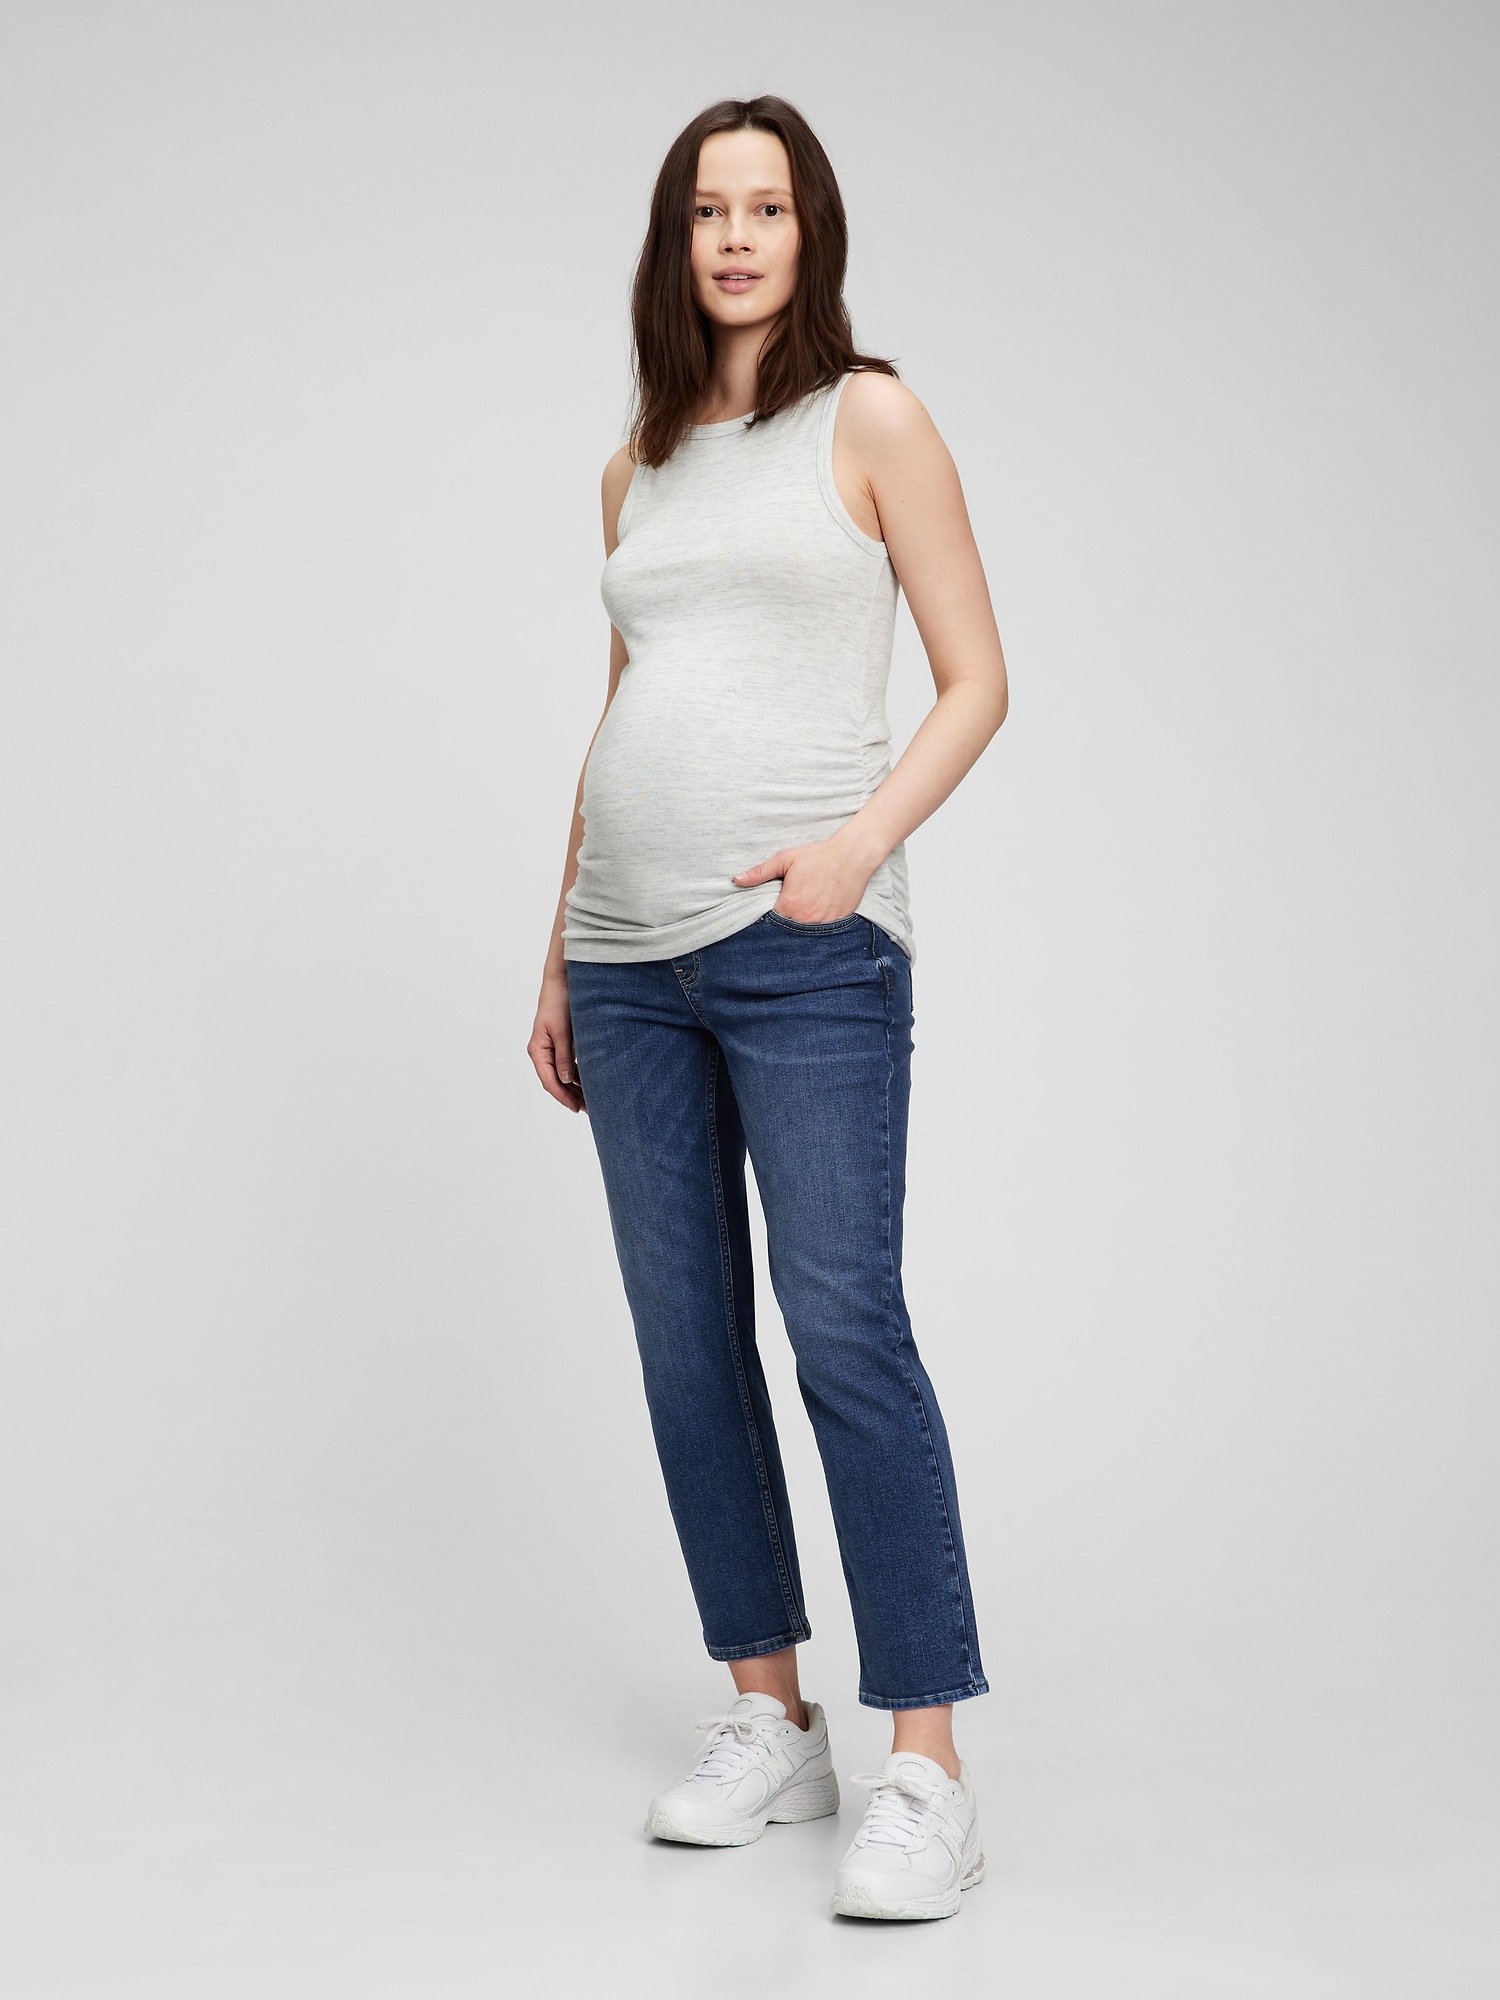 Gap Maternity True Waistband Full Panel 90s Loose Jeans with Washwell